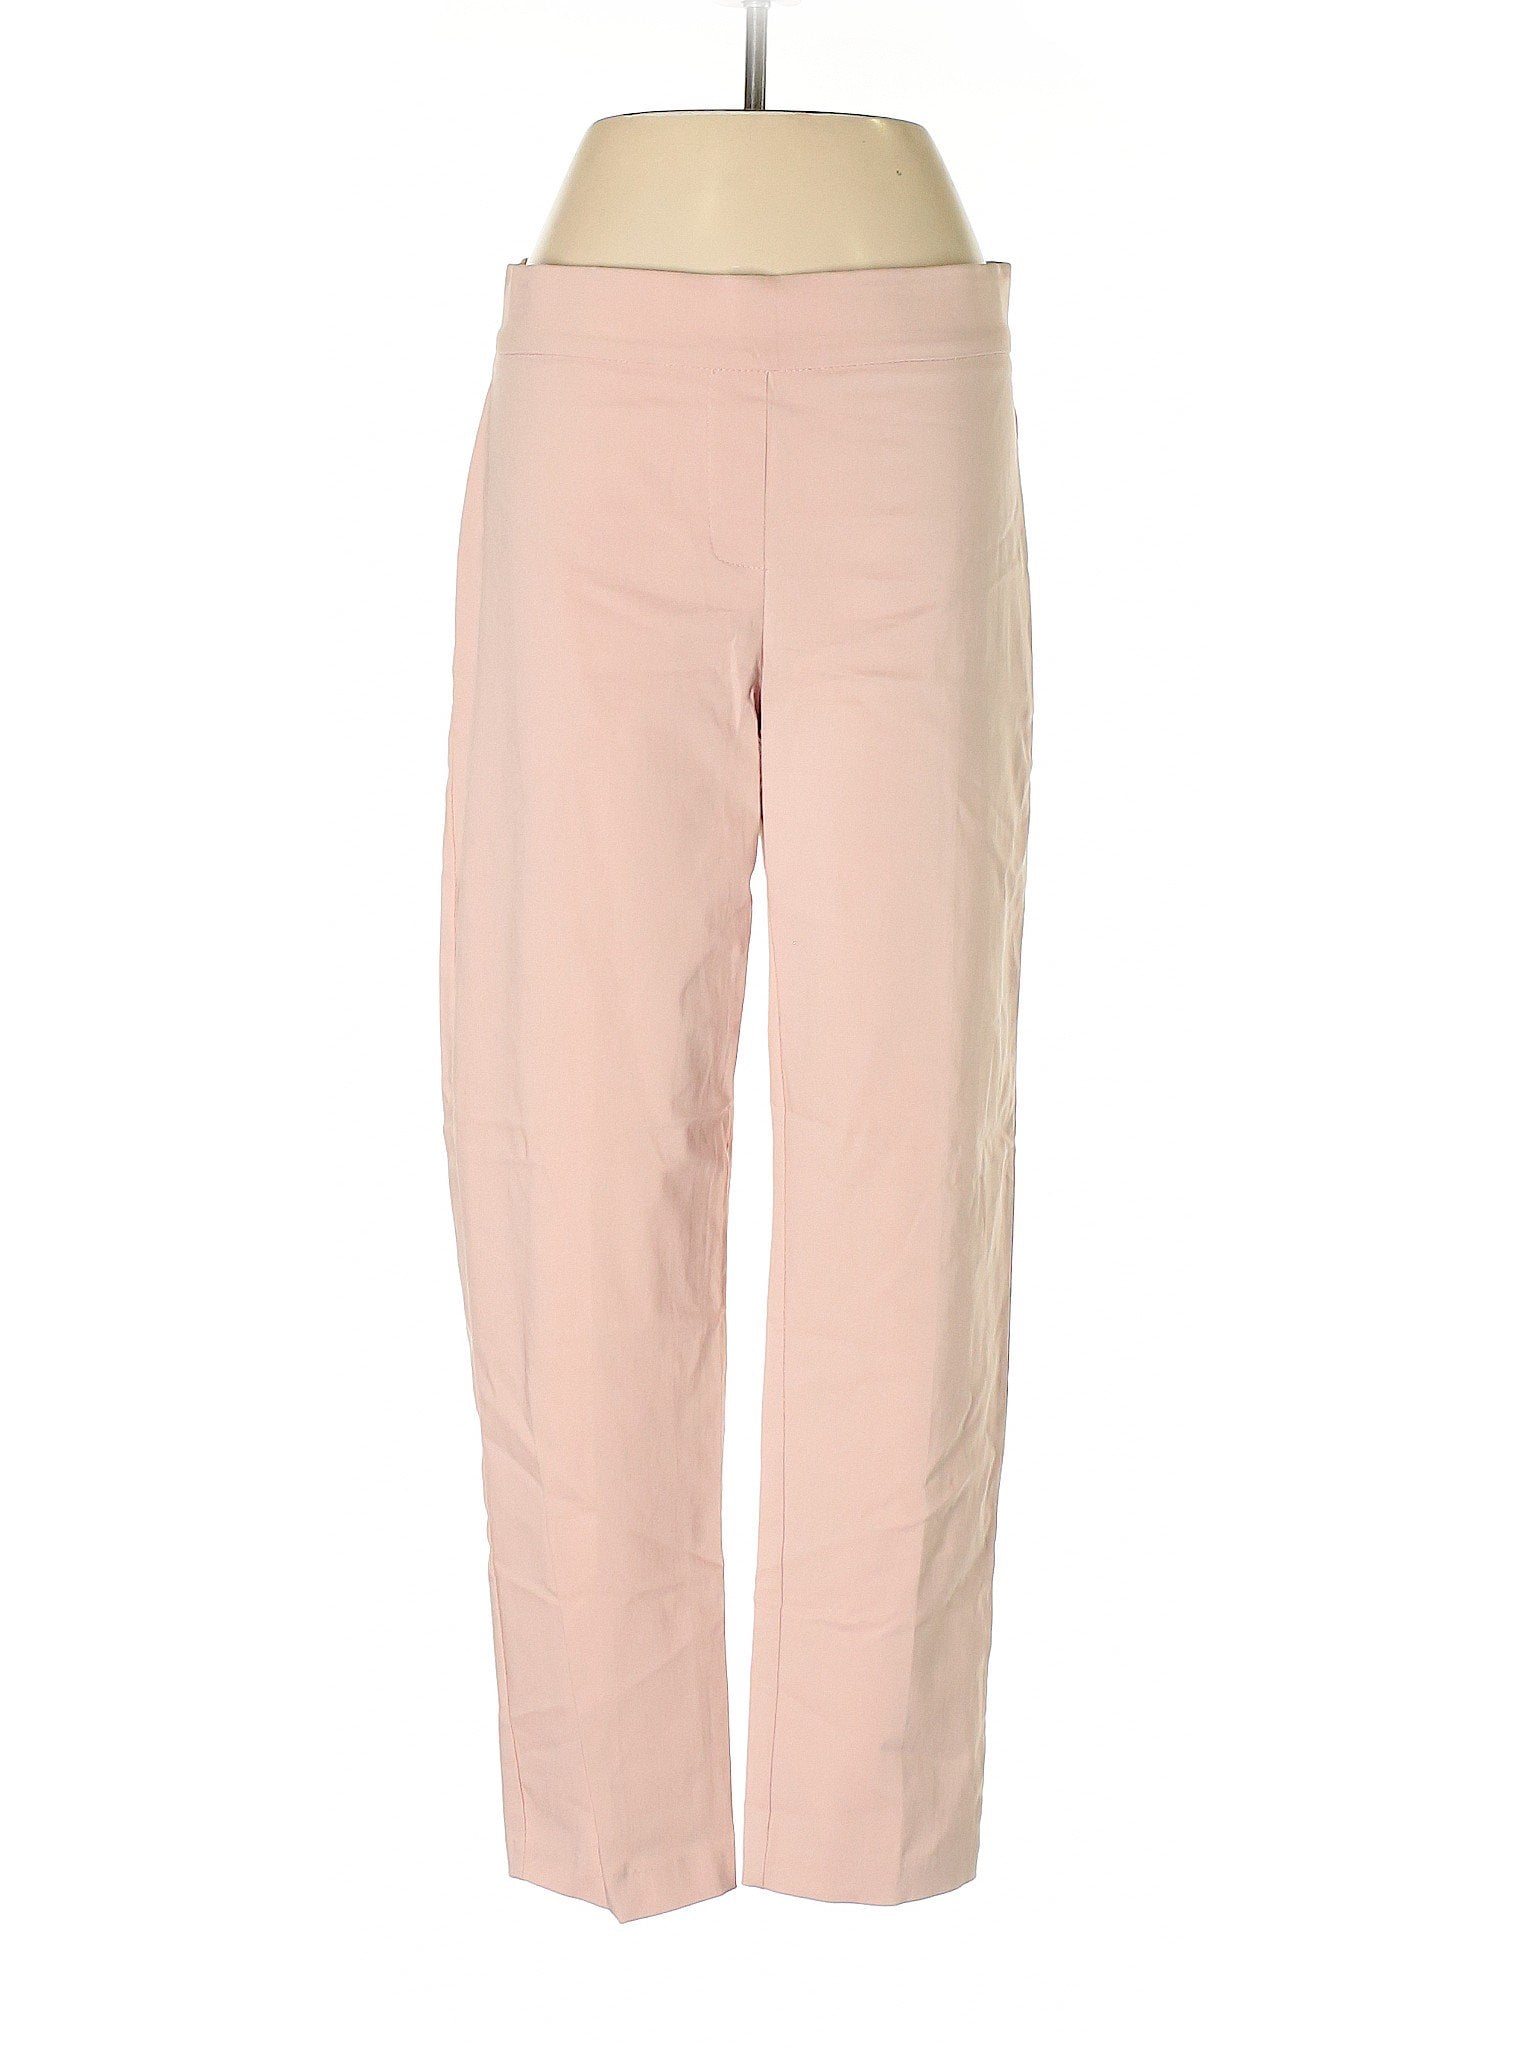 89th and Madison - Pre-Owned 89th & Madison Women's Size M Casual Pants ...